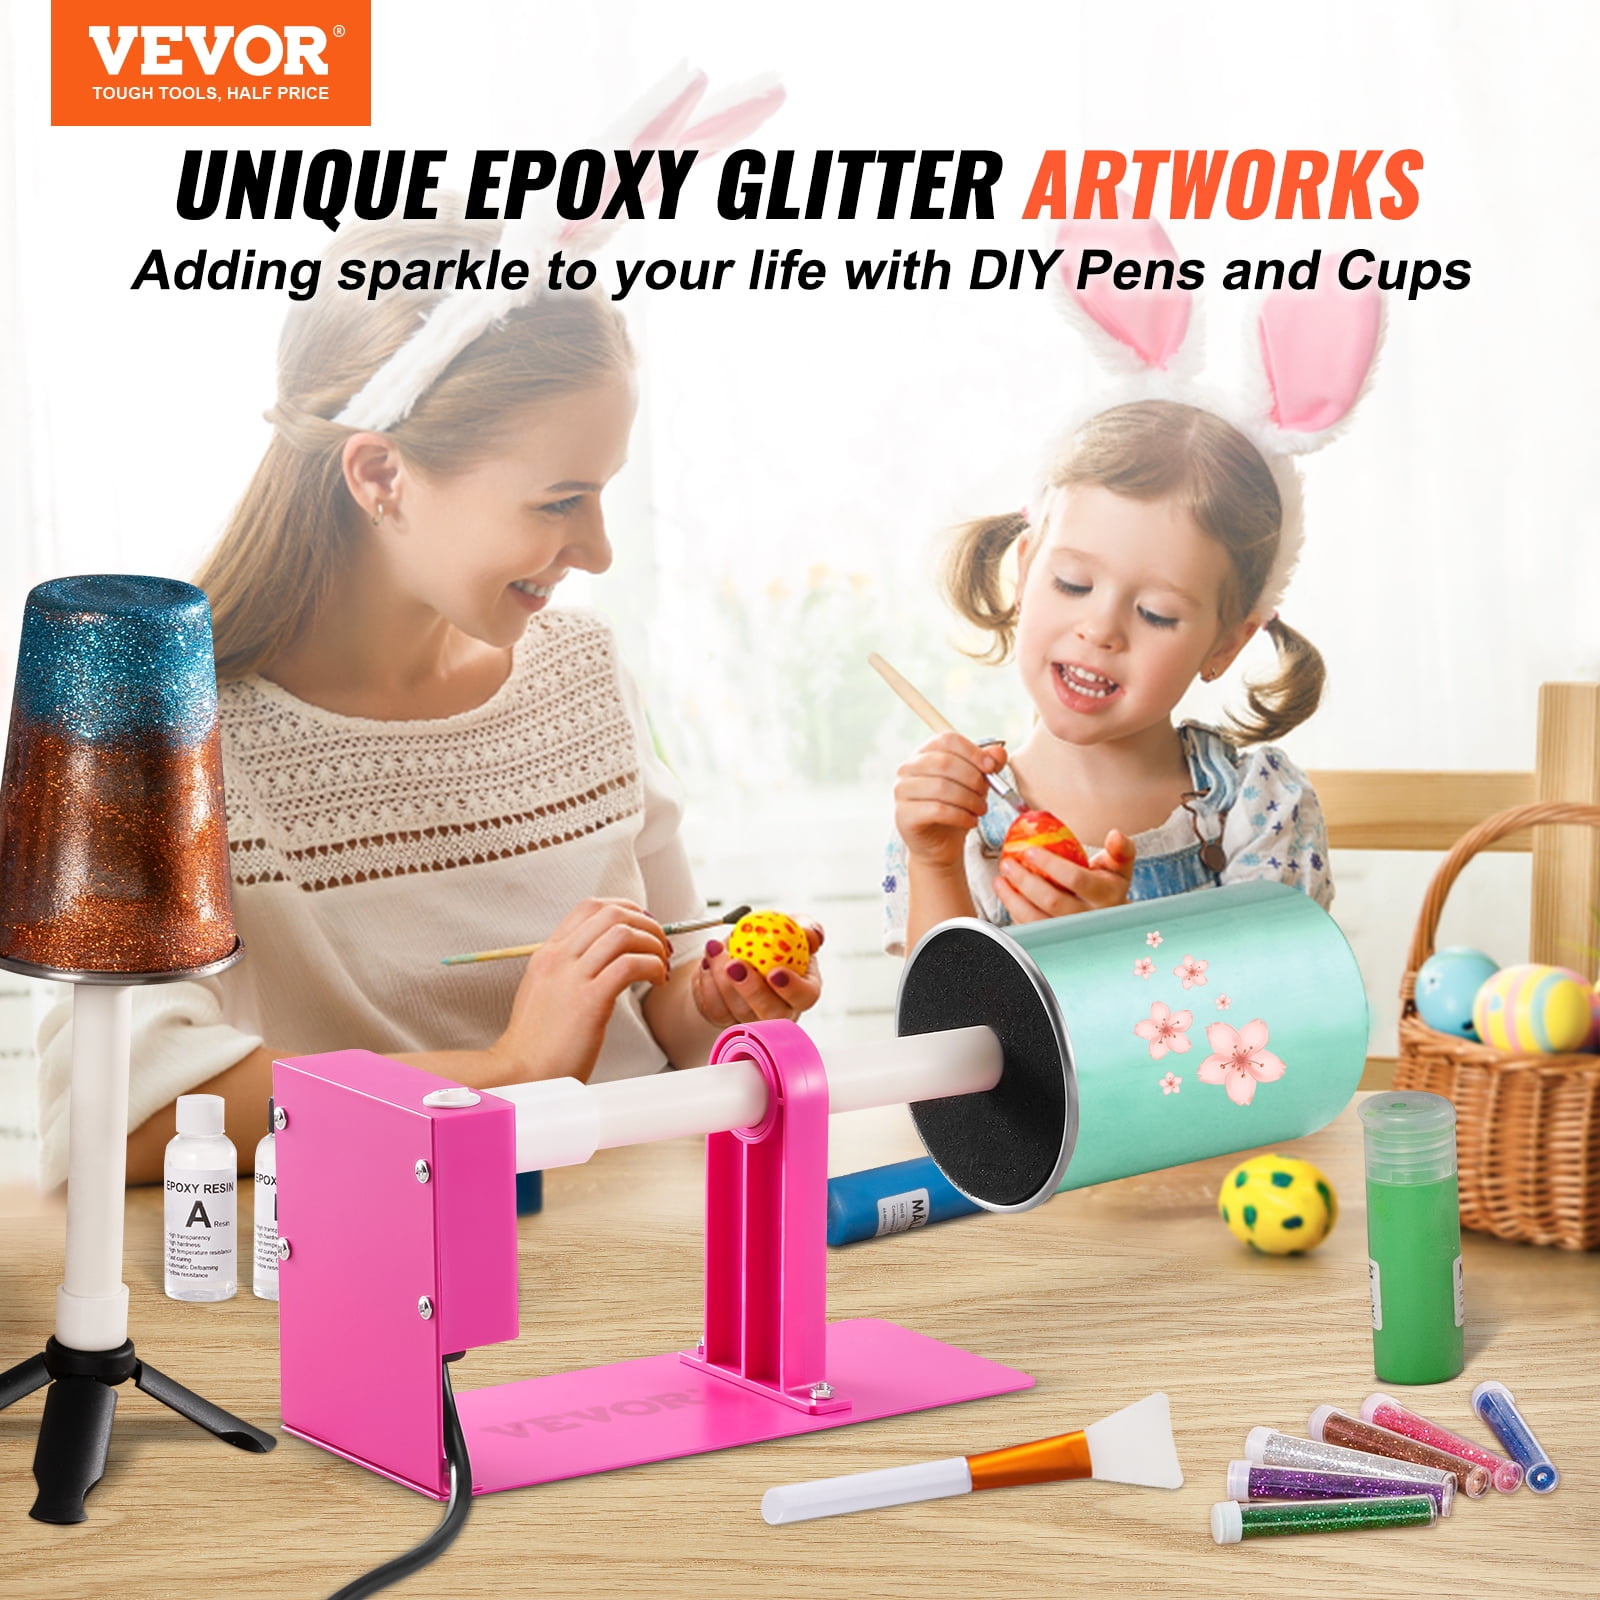 AFW Cup Turners for Tumblers Starter Kit,Pen Spinner for Epoxy,Cup Spinner for Tumbler with Epoxy and Heat Gun,epoxy Pen Turner Attachment,Epoxy Resin